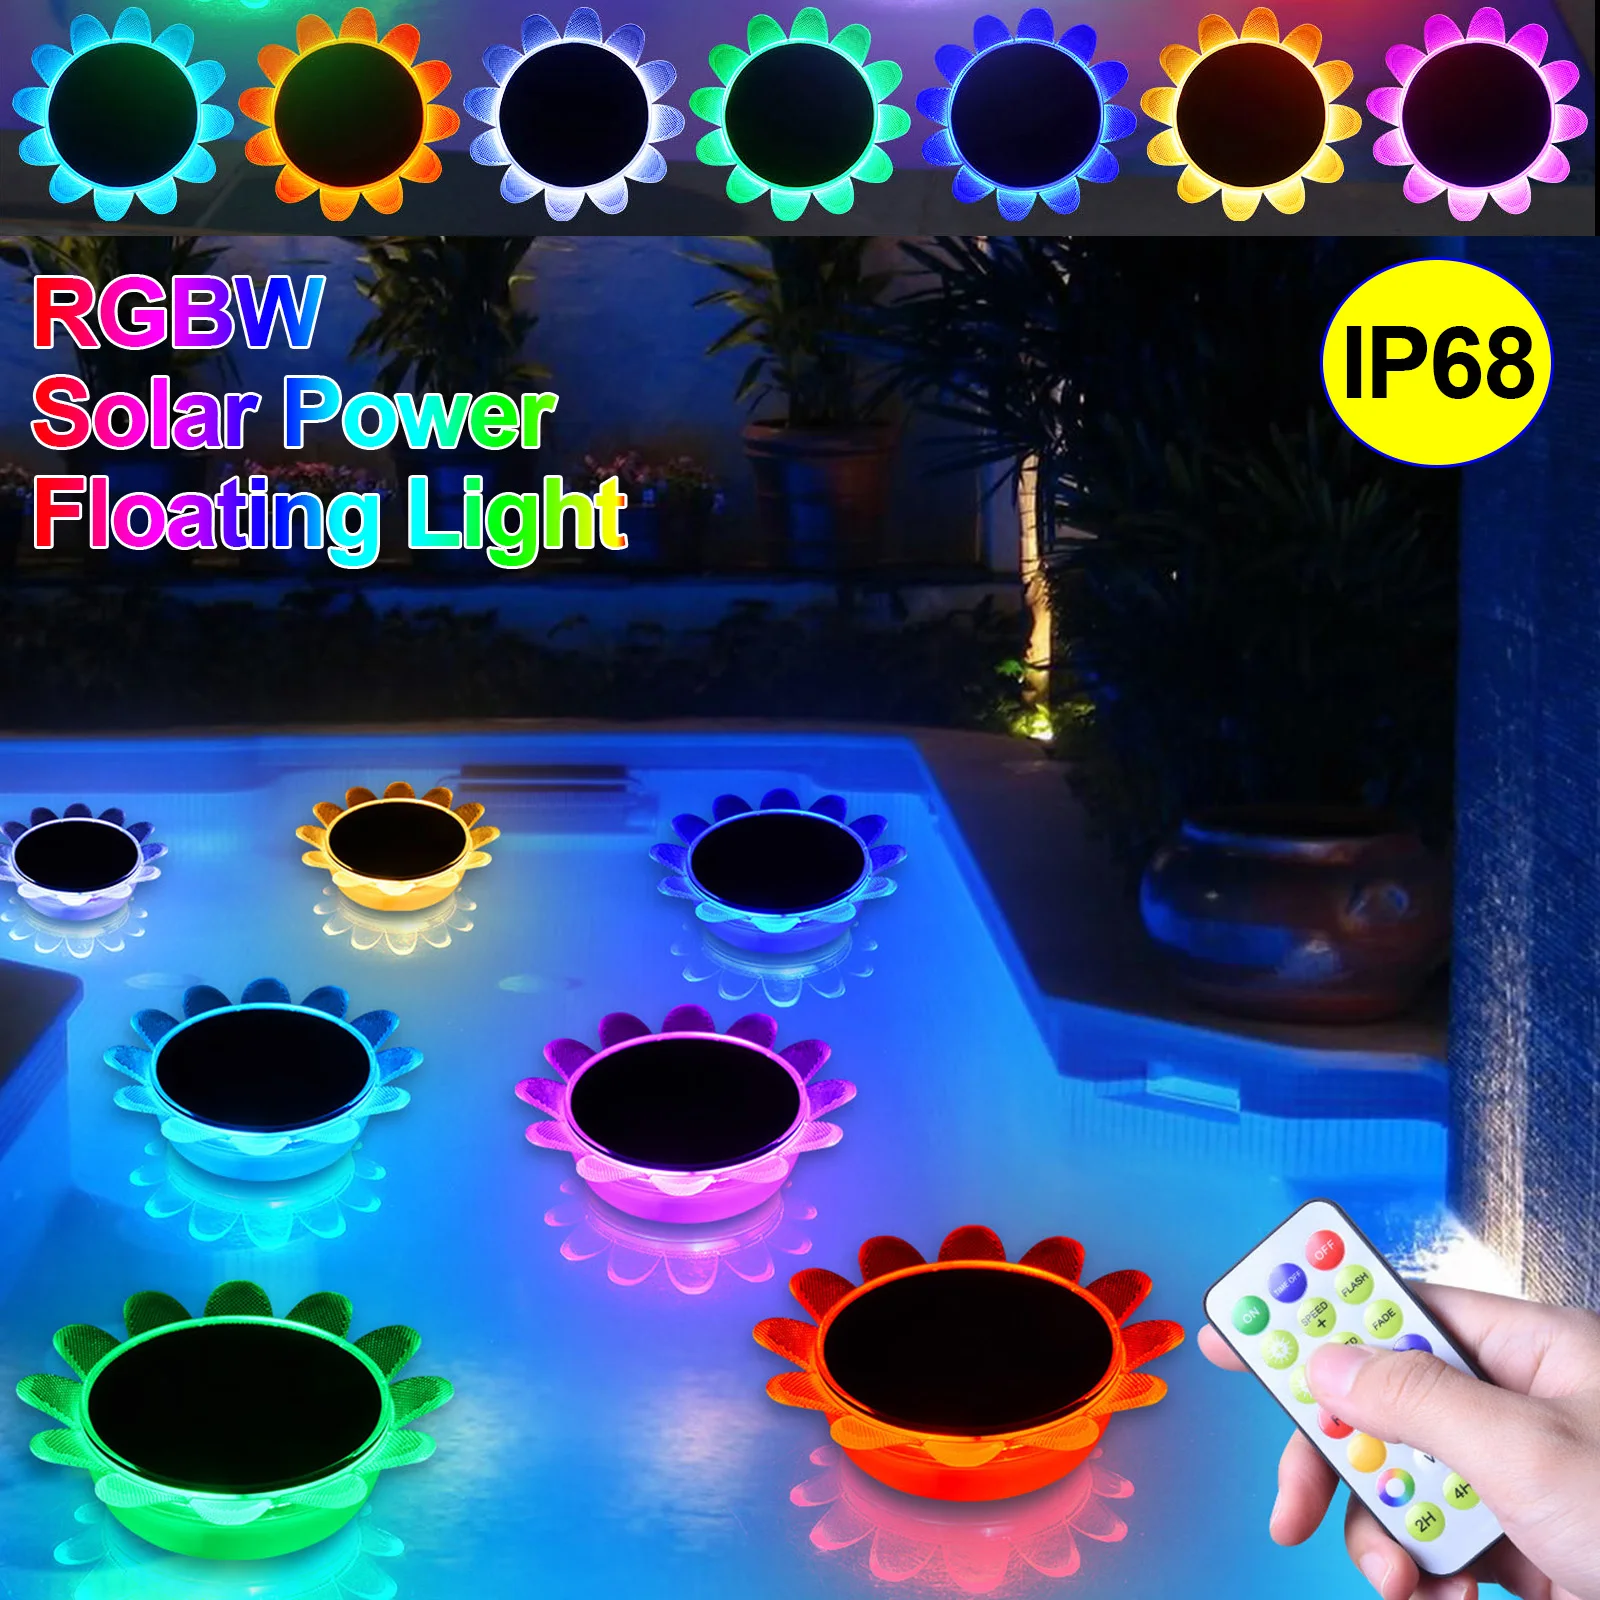 Floating Pool Lights 4 Modes Changing IP68 Waterproof LED Pond Lights IR Remote Control Solar Pool Lights Sunflower Pool Decor metal detector pinpointer ip68 full waterproof pin pointer wand 3 modes handheld pinpointing finder probe treasure hunting